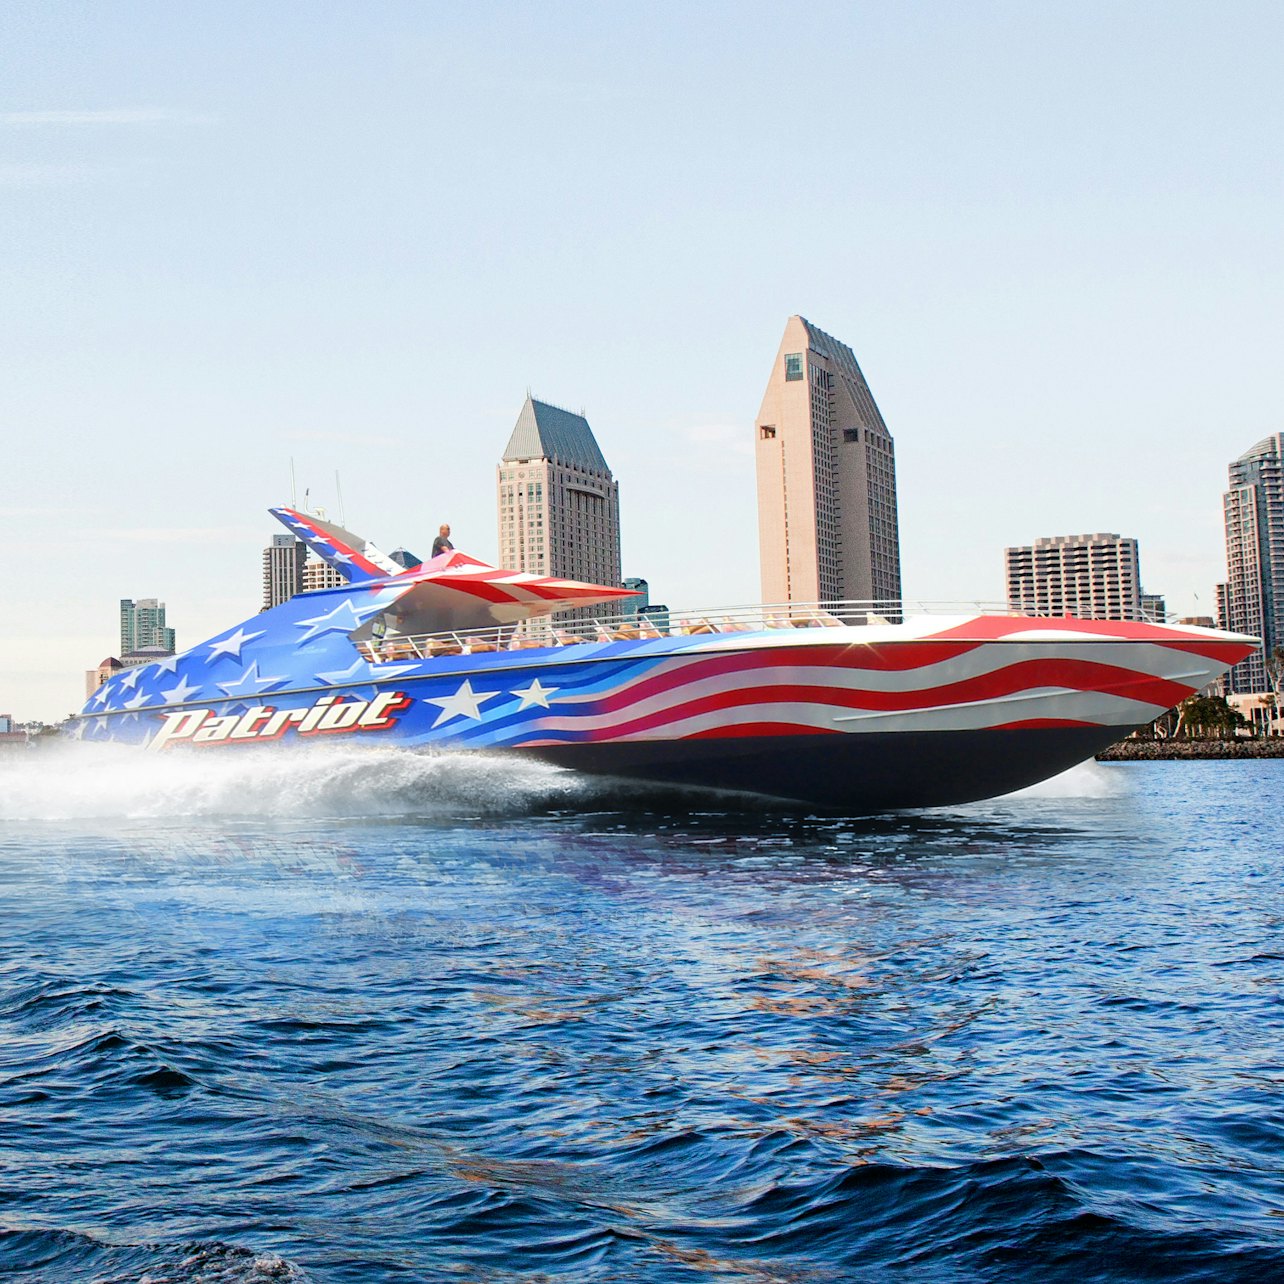 San Diego: Patriot Jet Boat Thrill Ride - Accommodations in San Diego